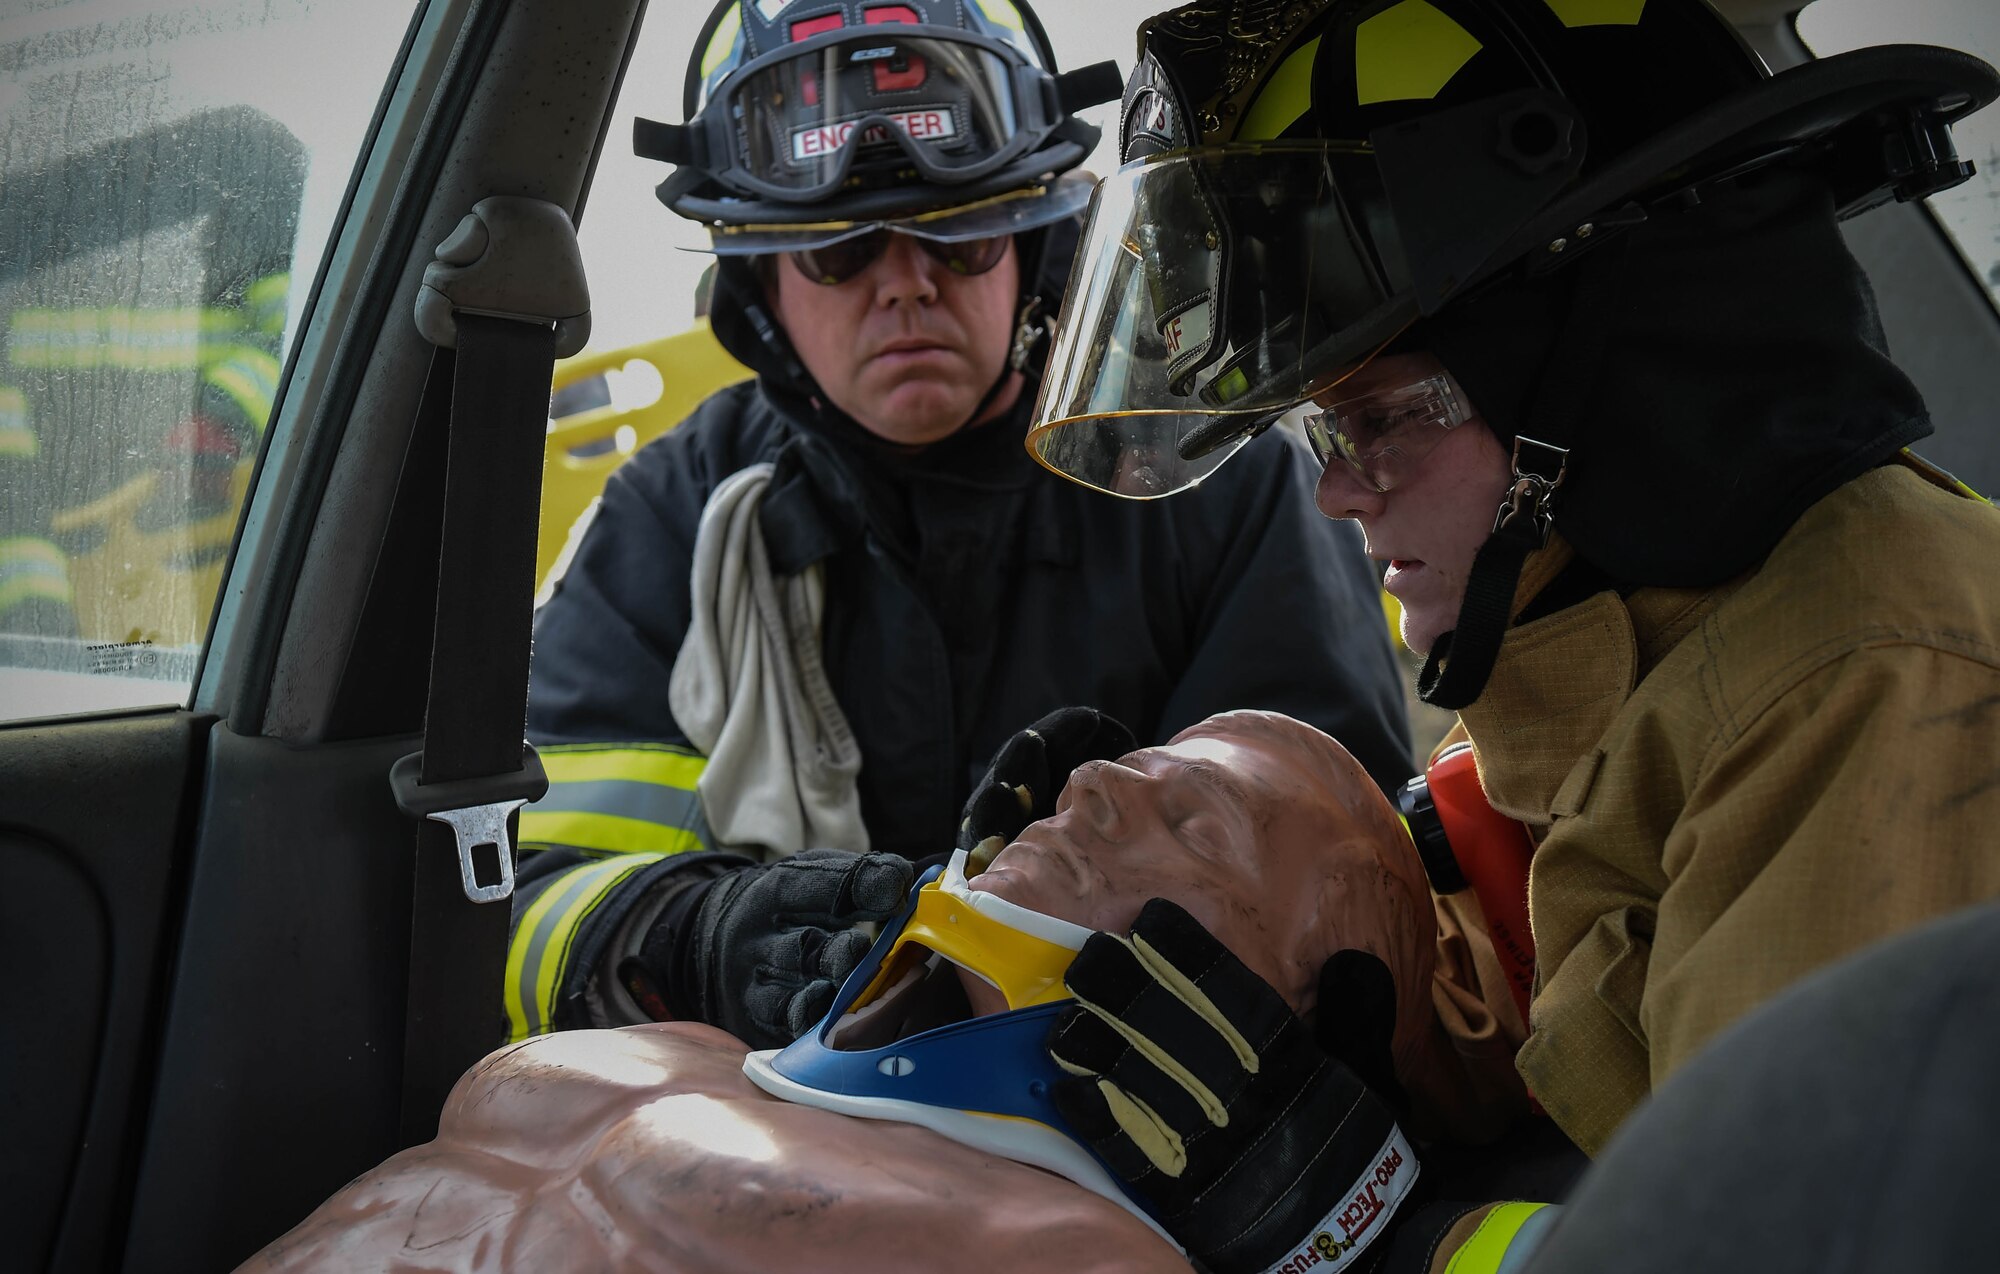 Mr. Paul Dahlen, left, and Airman 1st Class Angelica Redmond, both 60th Civil Engineering Squadron firefighters, apply a neck brace to a rescue dummy during vehicle extrication training April 7, 2016,  at Travis Air Force Base, California. The Team Travis fire department worked with the 571st Mobility Support Advisory Squadron on vehicle extrication for future deployments to South and Central America. (U.S. Air Force photo by Staff  Sgt. Robert  Hicks/Released)